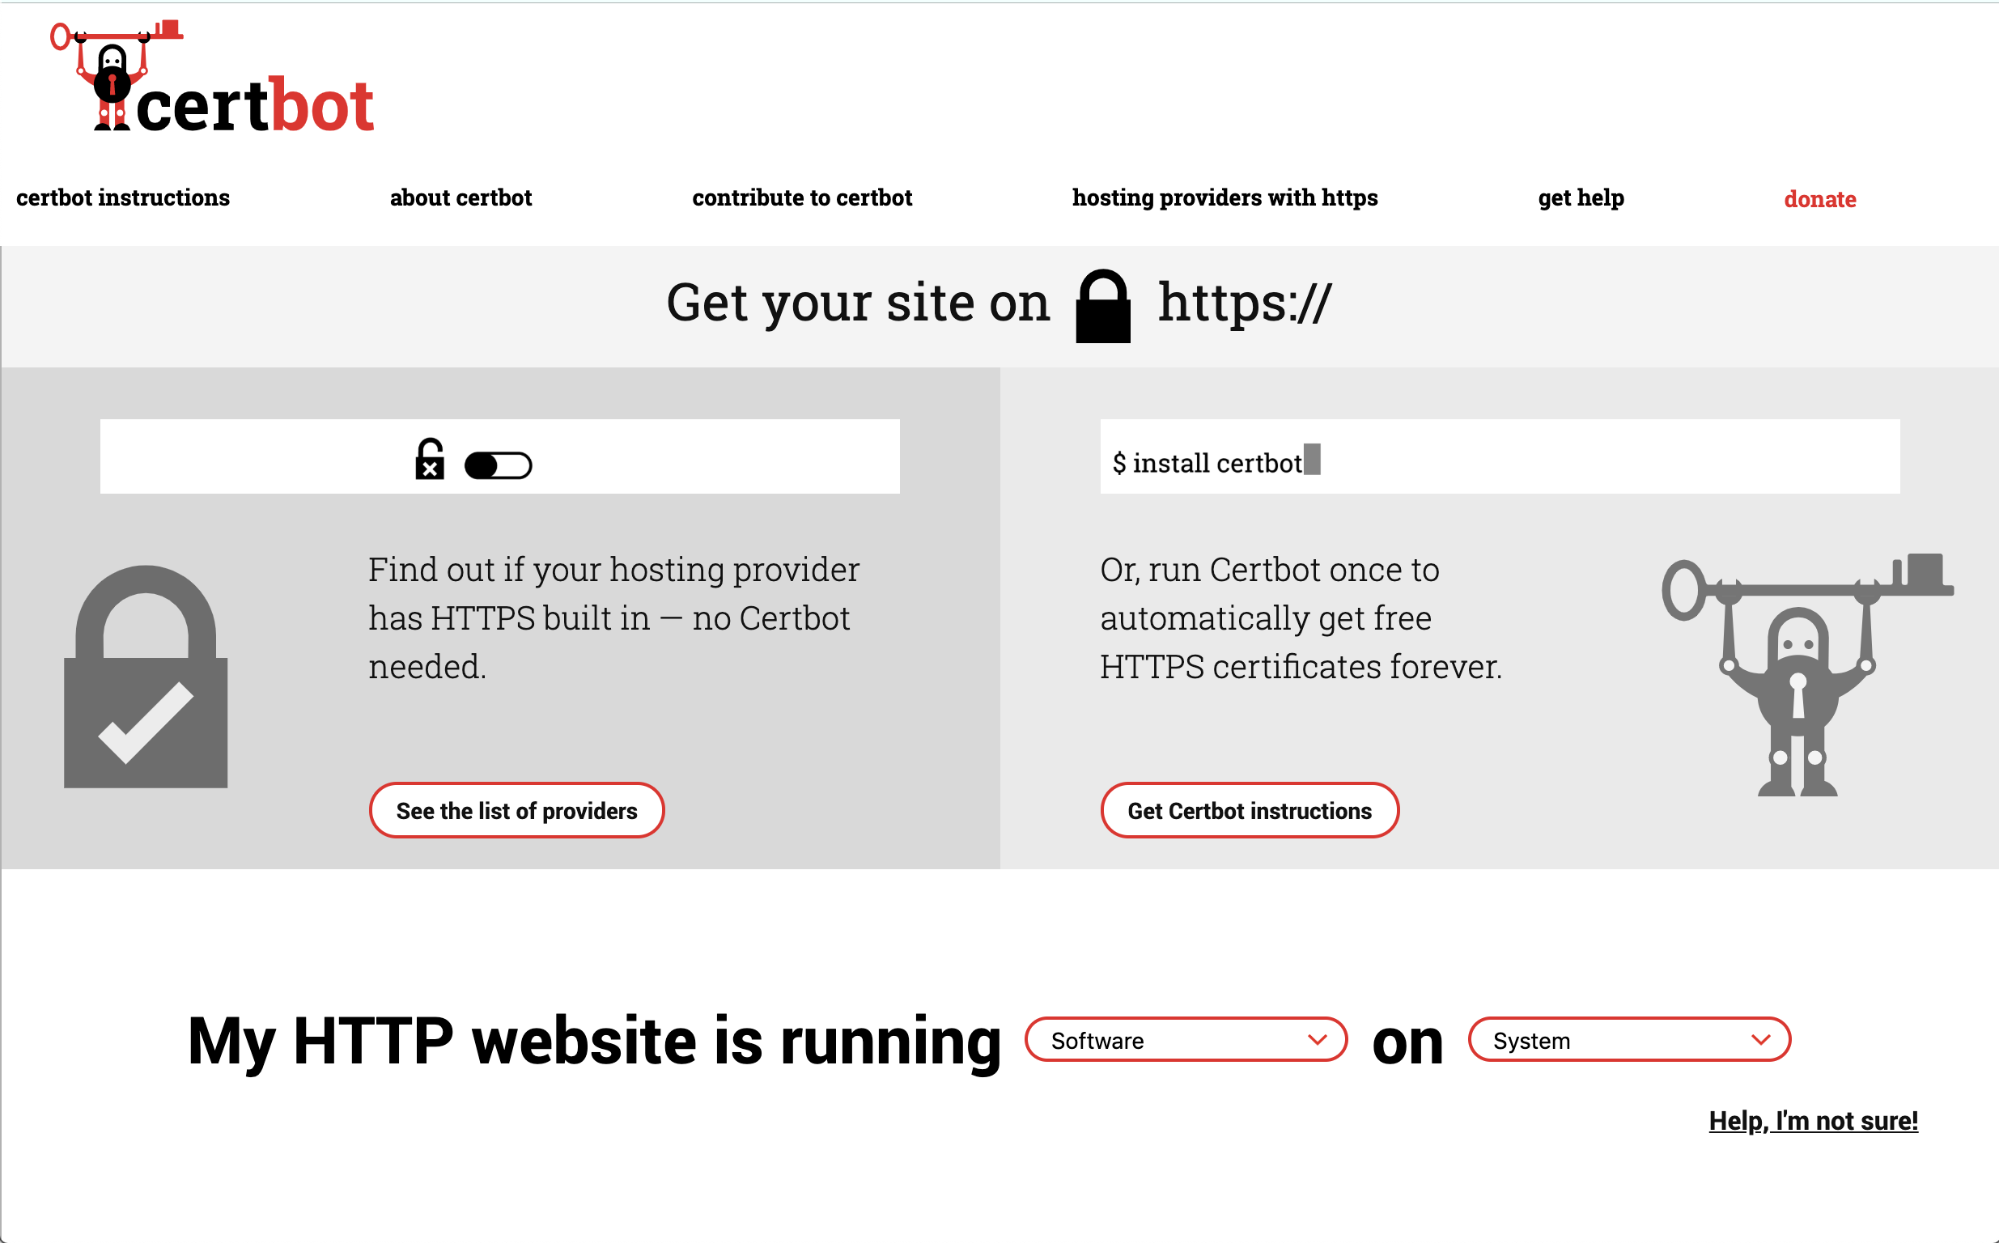 A screenshot of the new Certbot site, which includes a revised dropdown menu with the sentence "My HTTP website is running [software] on [system]."